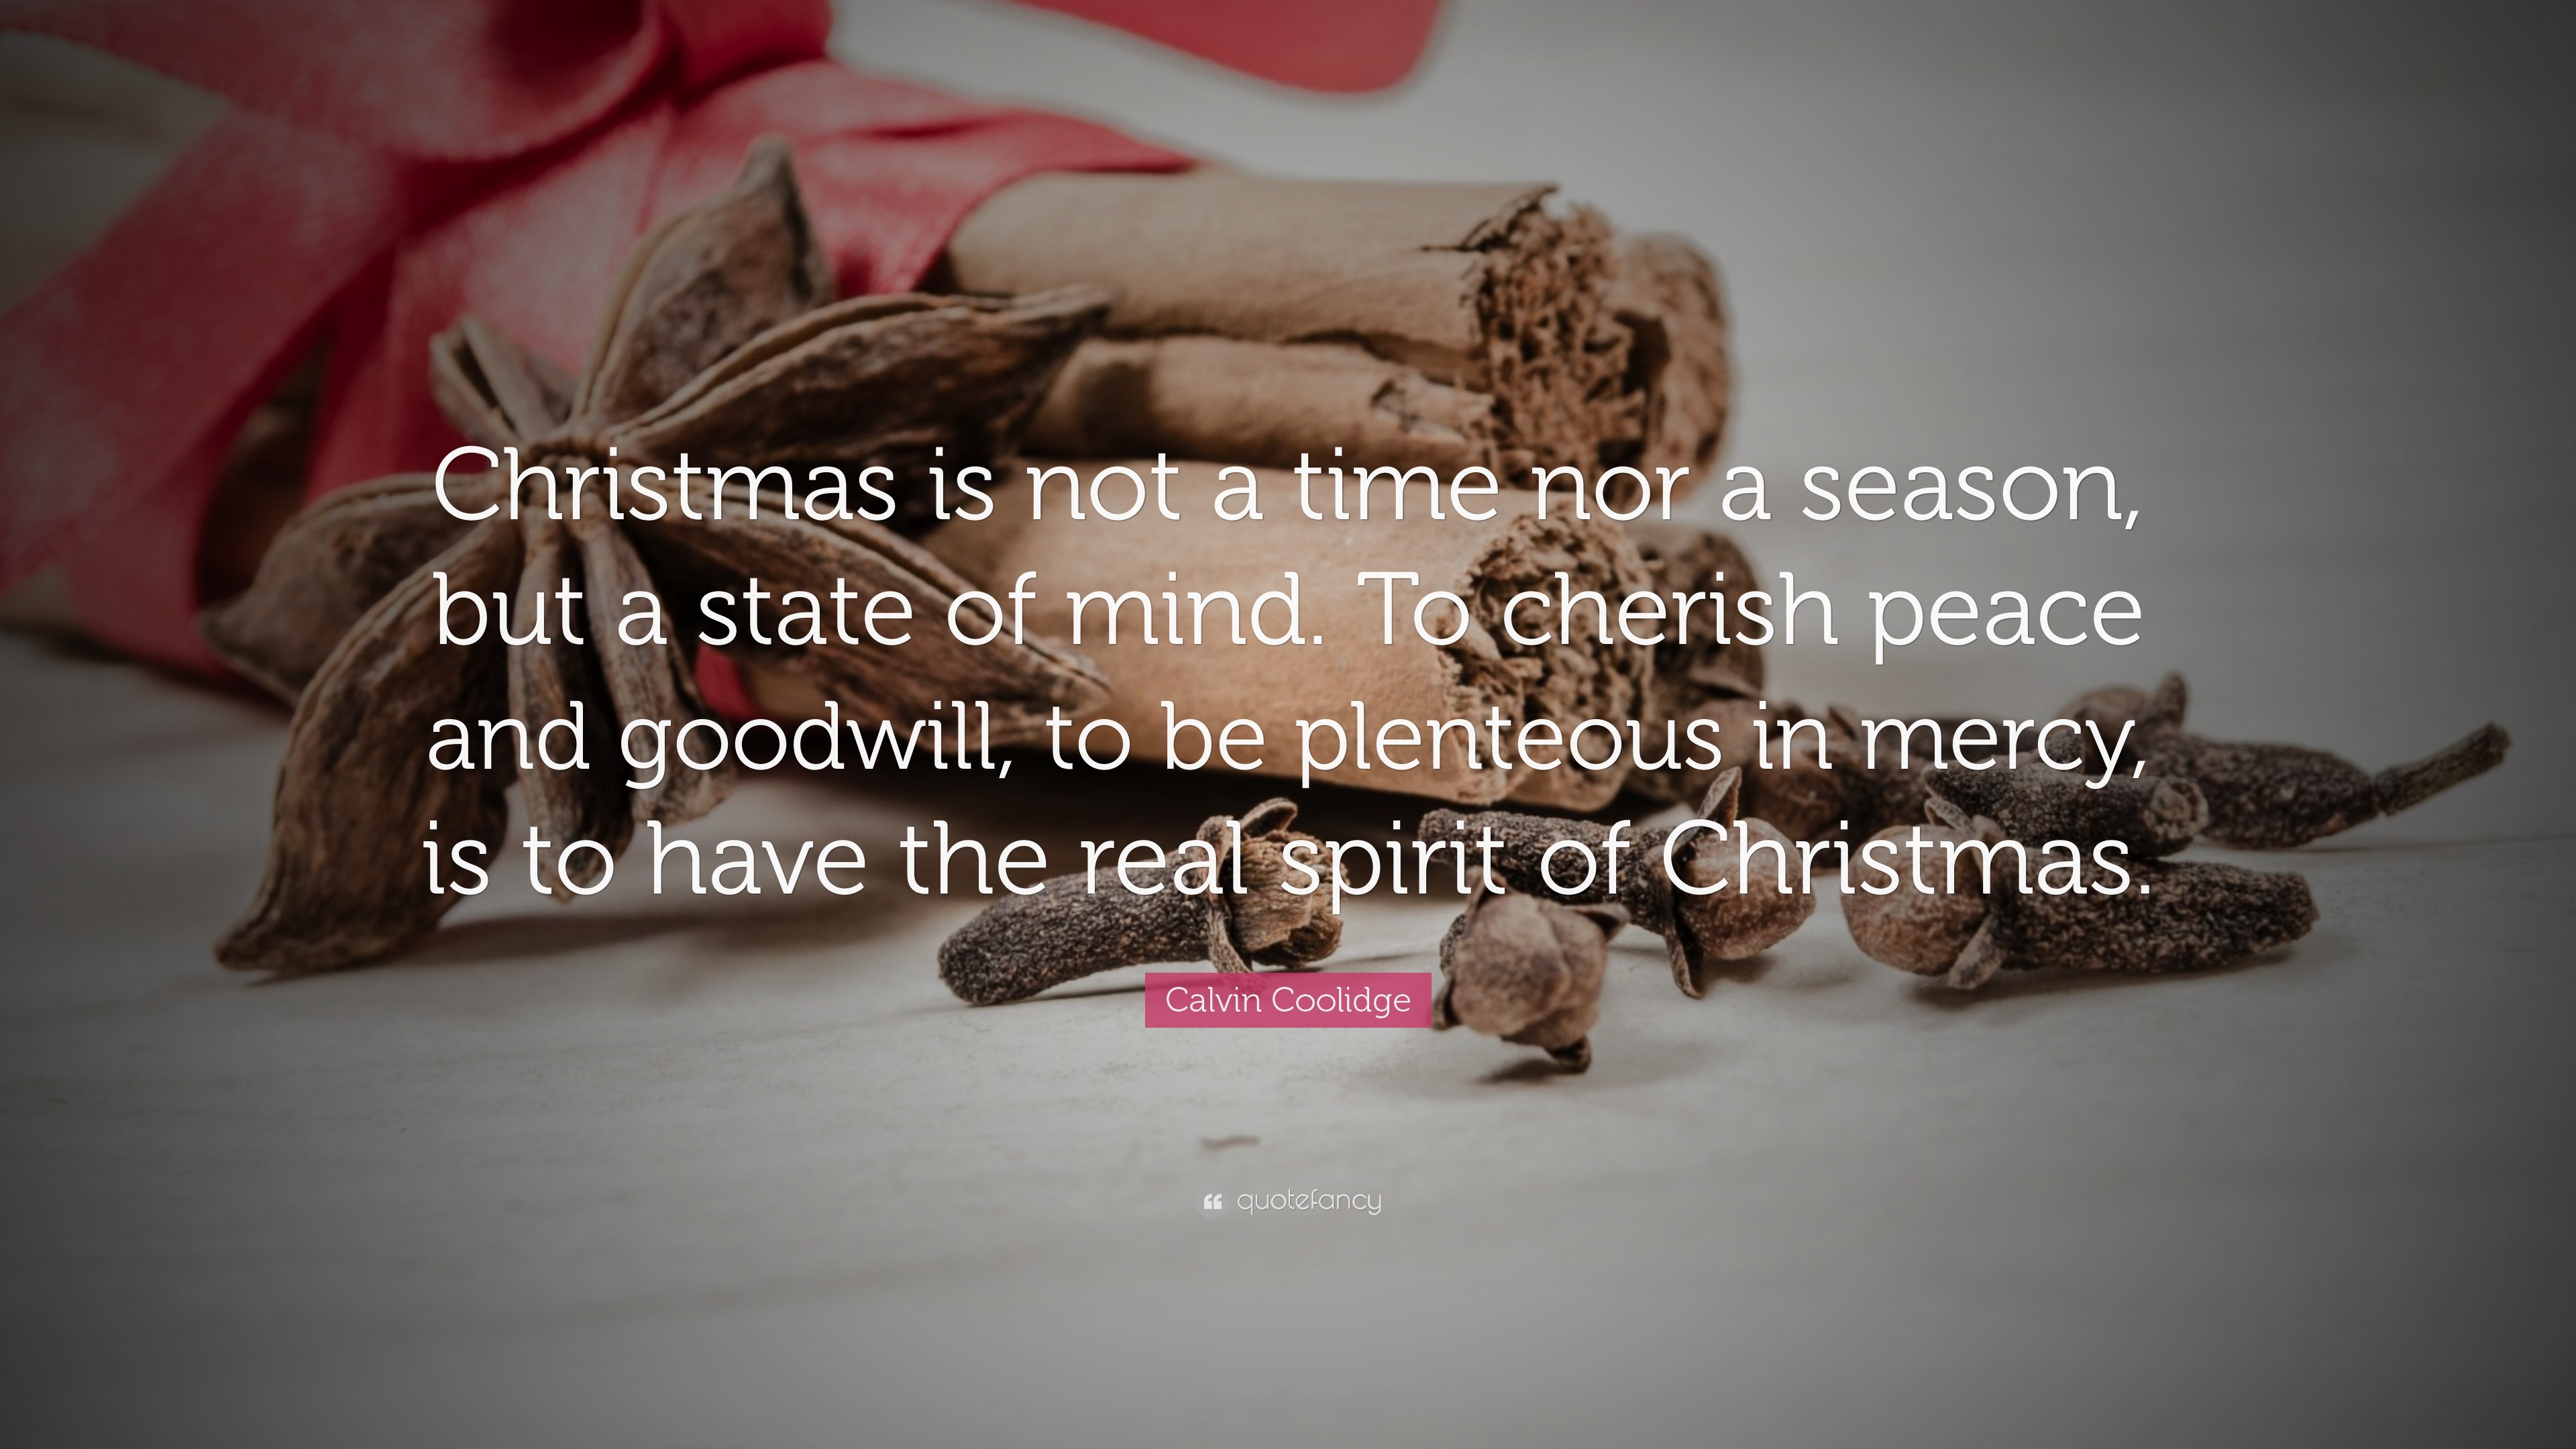 Calvin Coolidge Quote “Christmas is not a time nor a season but a